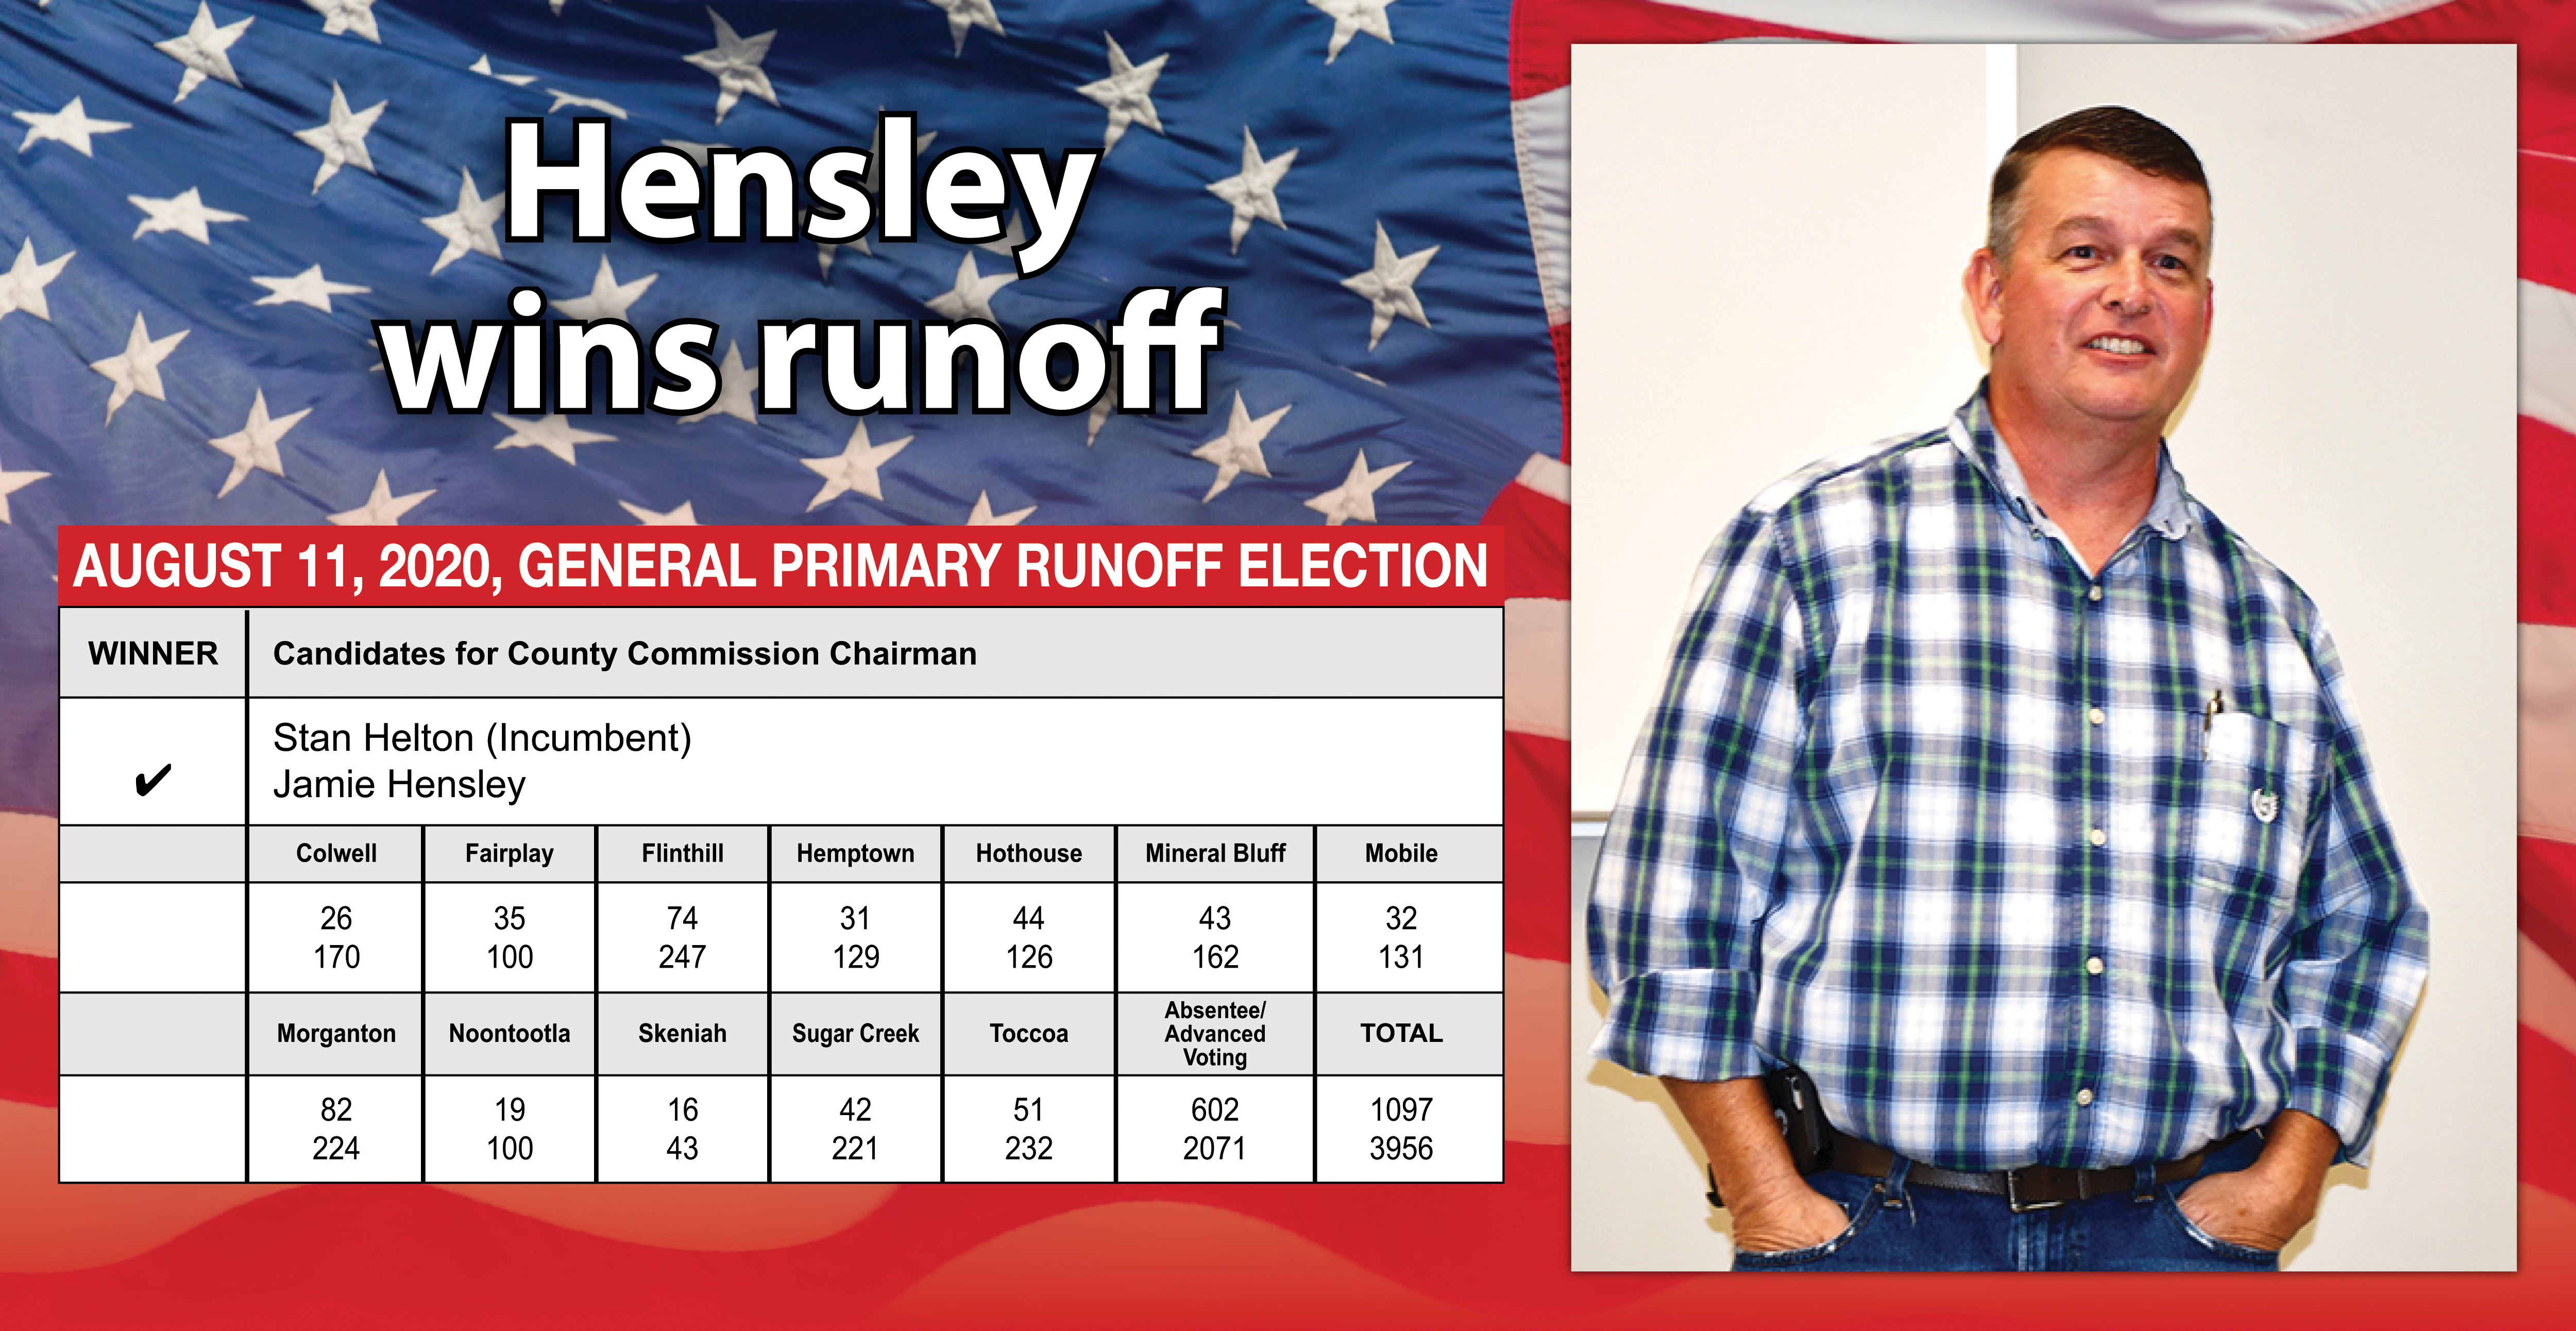 Jamie Hensley will now serve as the Board of Commissioners chairman starting next year following a 78% win in the Republican Primary Runoff August 11.